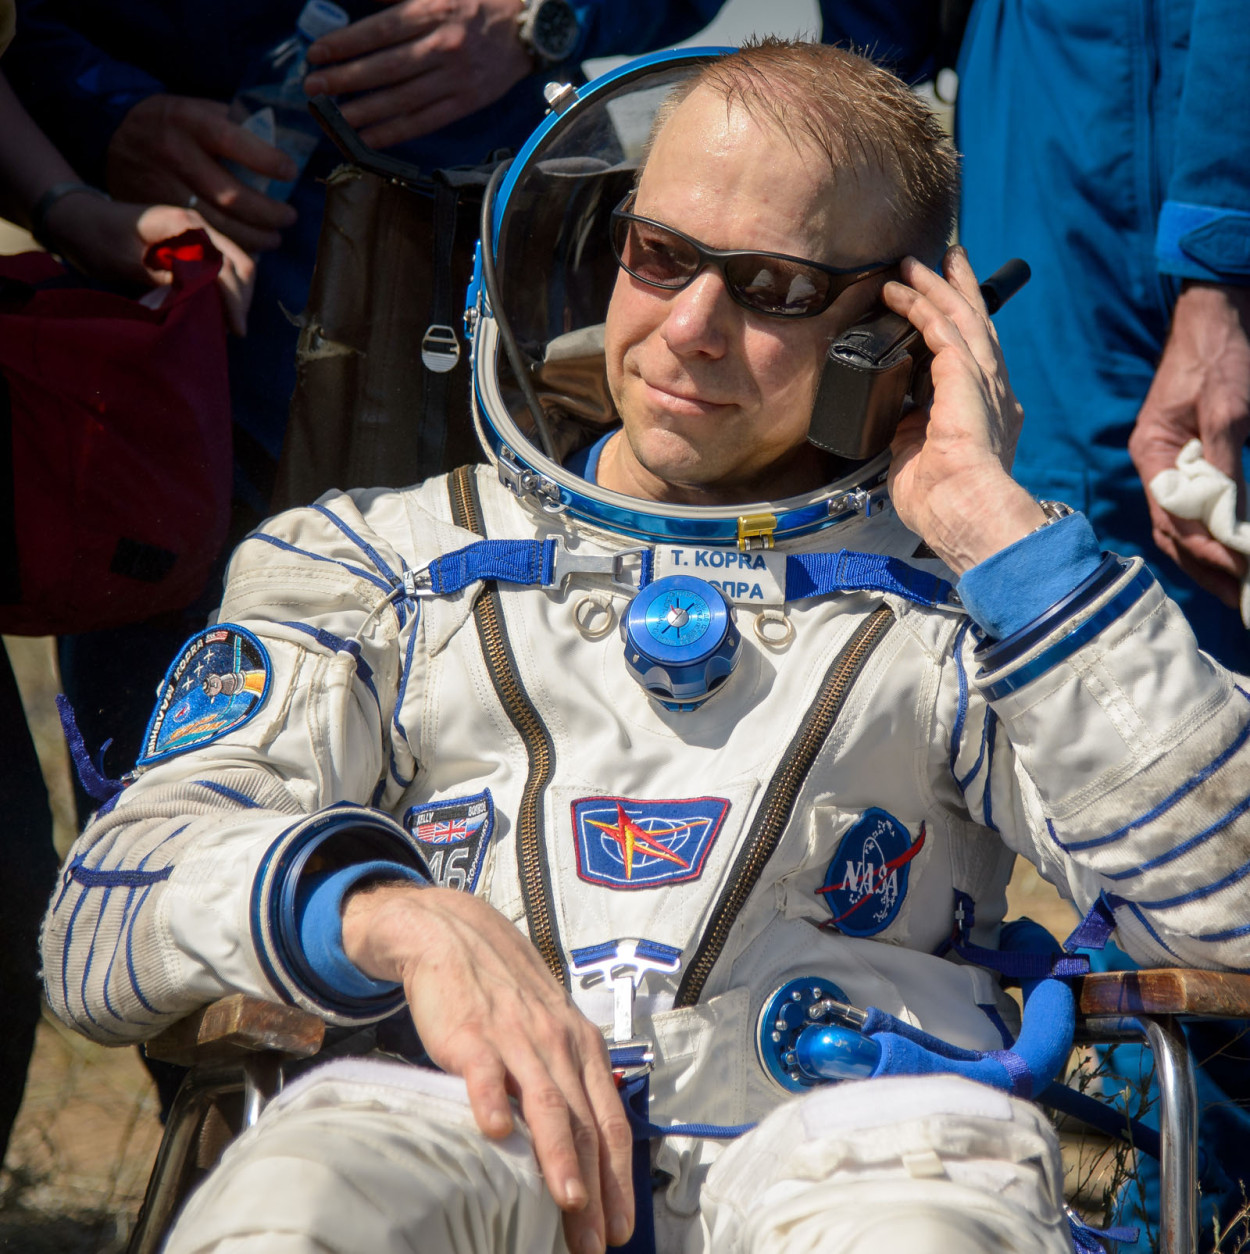 Tim Kopra of NASA talks on a satellite phone outside the Soyuz TMA-19M spacecraft just minutes after he and Yuri Malenchenko of Roscosmos and Tim Peake of the European Space Agency landed in a remote area near the town of Zhezkazgan, Kazakhstan on Saturday, June 18, 2016.  Kopra, Peake, and Malenchenko are returning after six months in space where they served as members of the Expedition 46 and 47 crews onboard the International Space Station. Photo Credit: (NASA/Bill Ingalls)